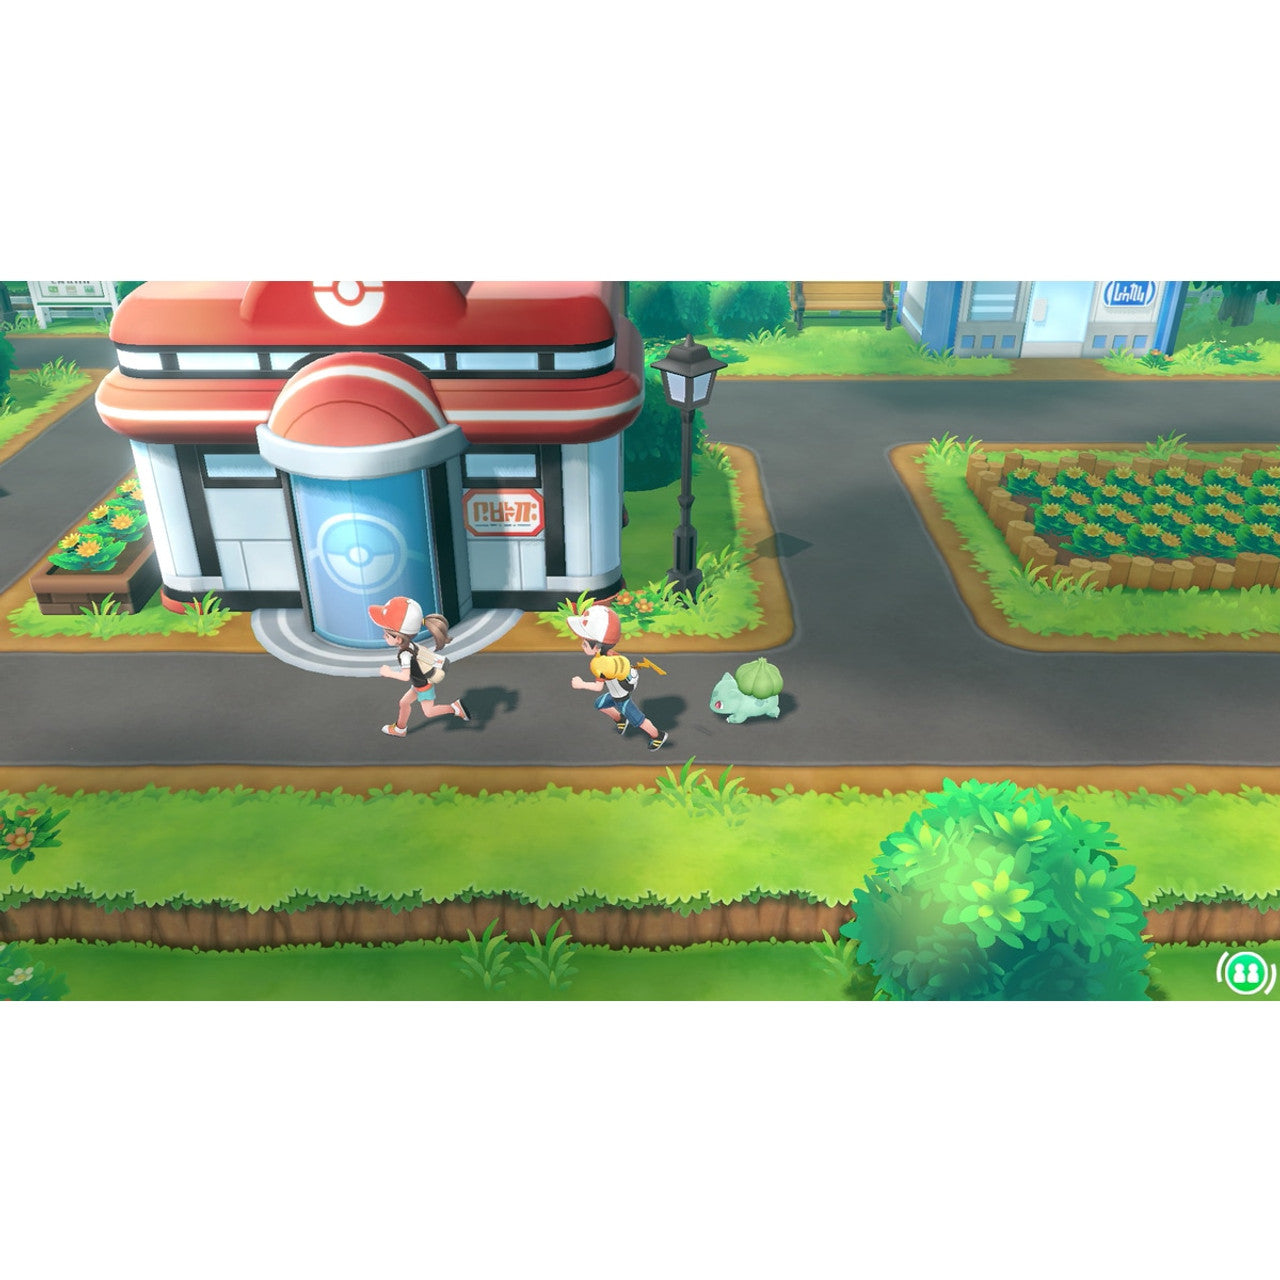 Product Image : This is brand new.<br>Take your Pokémon™ journey to the Kanto region with your steadfast partner, Eevee, to become a top Pokémon Trainer as you battle other trainers. Use a throwing motion to catch Pokémon in the wild with either one Joy-Con™ controller or Poké Ball™ Plus accessory, which will light up, vibrate, and make sounds to bring your adventure to life. Share your adventure with family or friends in 2-player action using a second Joy-Con or Poké Ball Plus (sold separately). You can ev